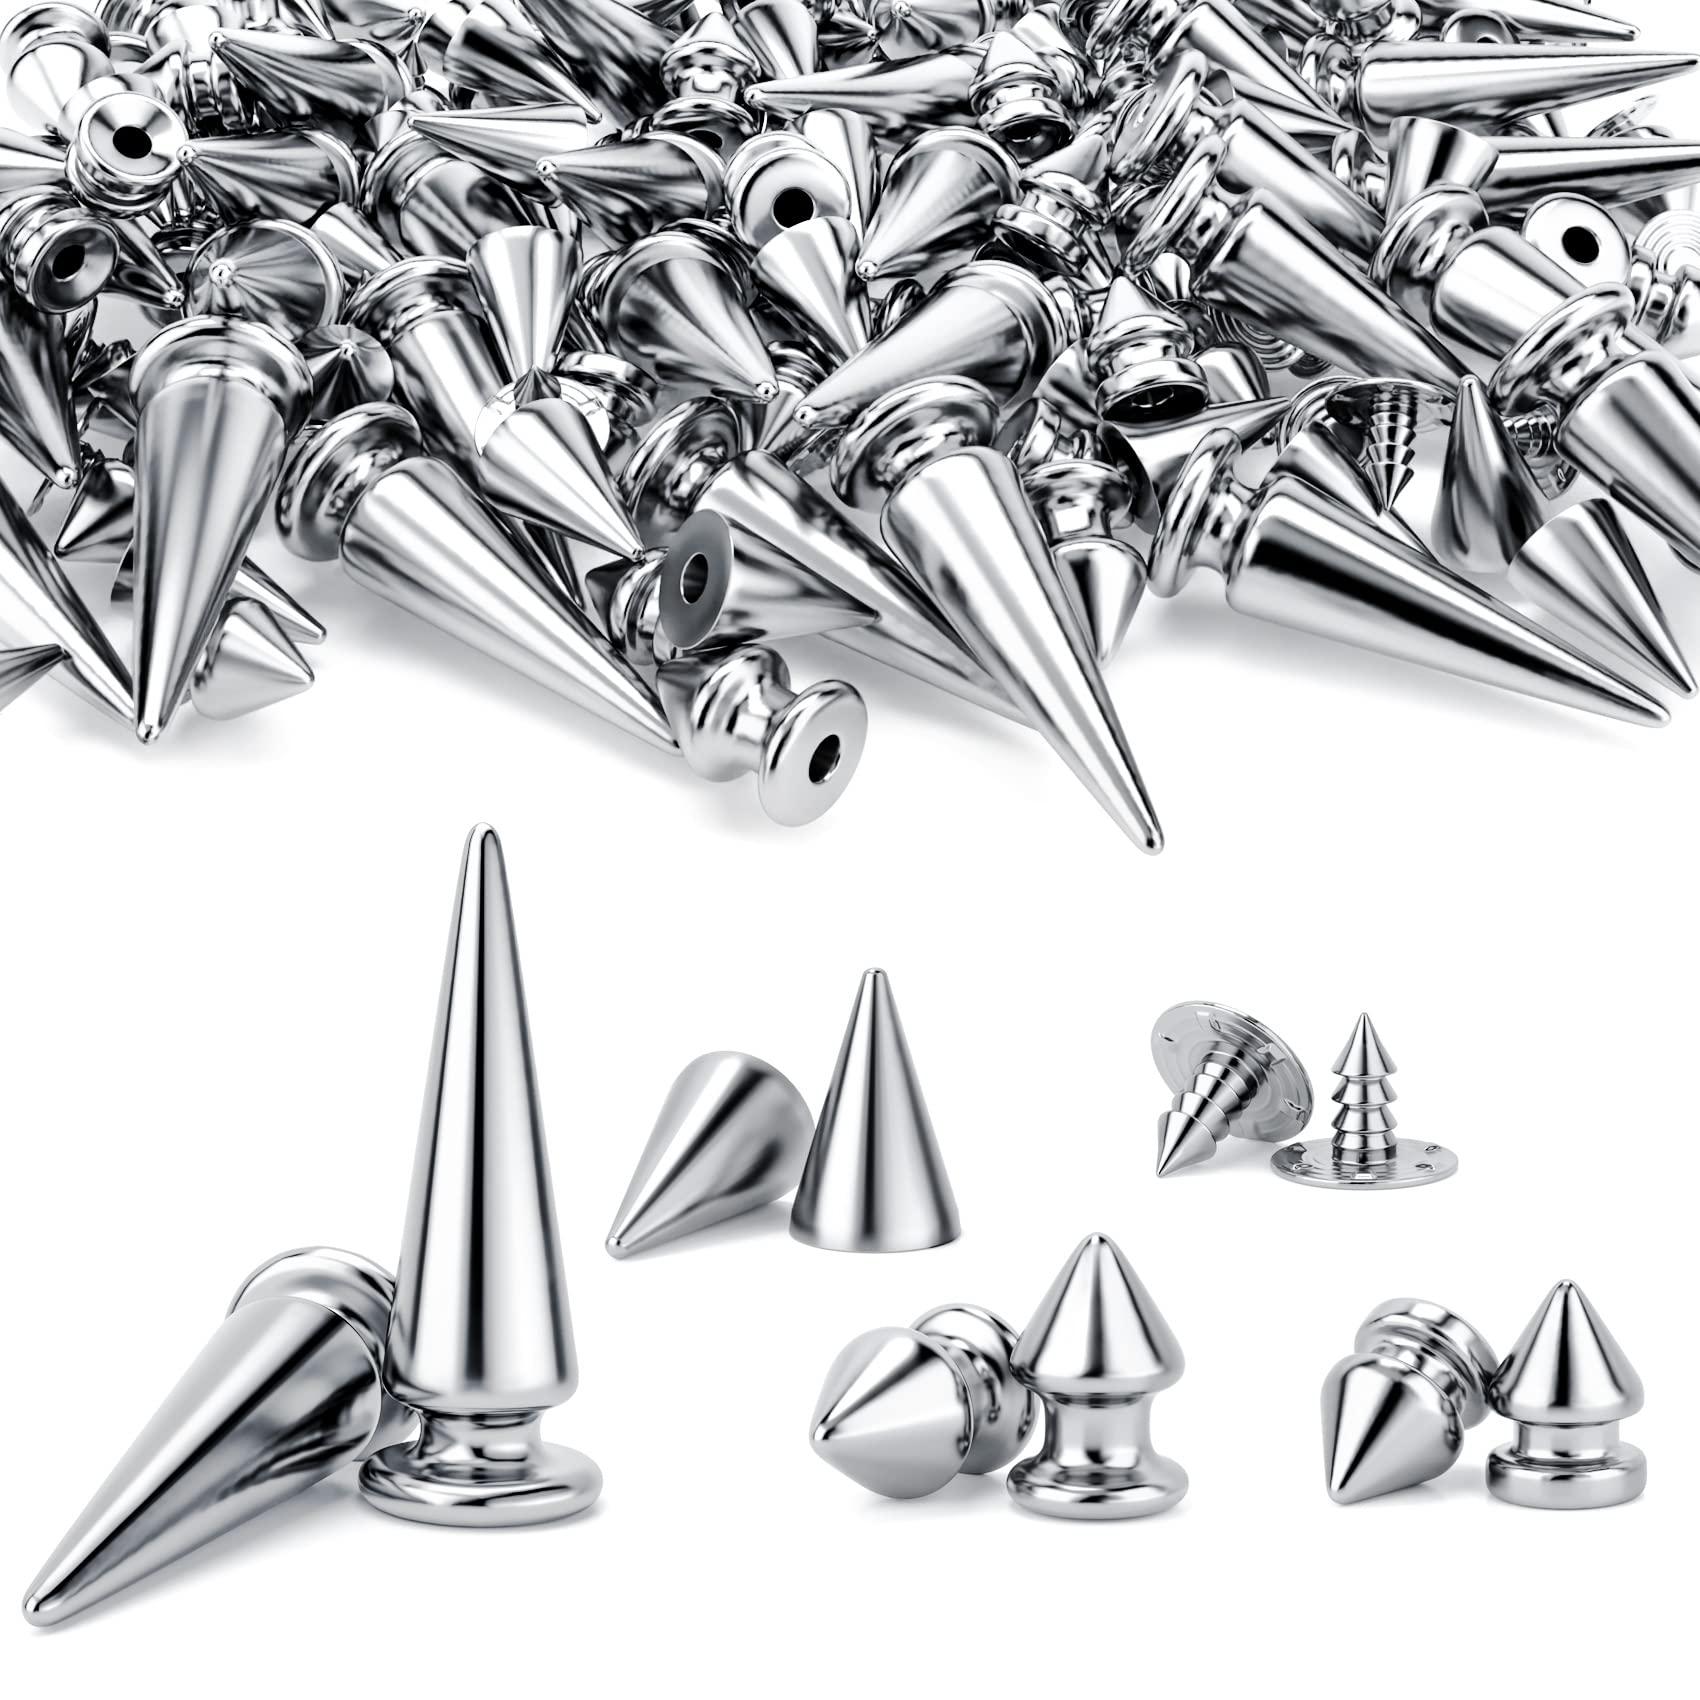 OIIKI 500PCS Silver ABS Bullet Spike Cone Studs Assorted Sizes Screwback  Rivets Cone Spike Studs Beads Flat Back Punk Spikes DIY Crafts Decoration  for Clothing Leather Belt Bag Shoes Jewelry Trims 6.7mm&8.8mm&11mm&12mm